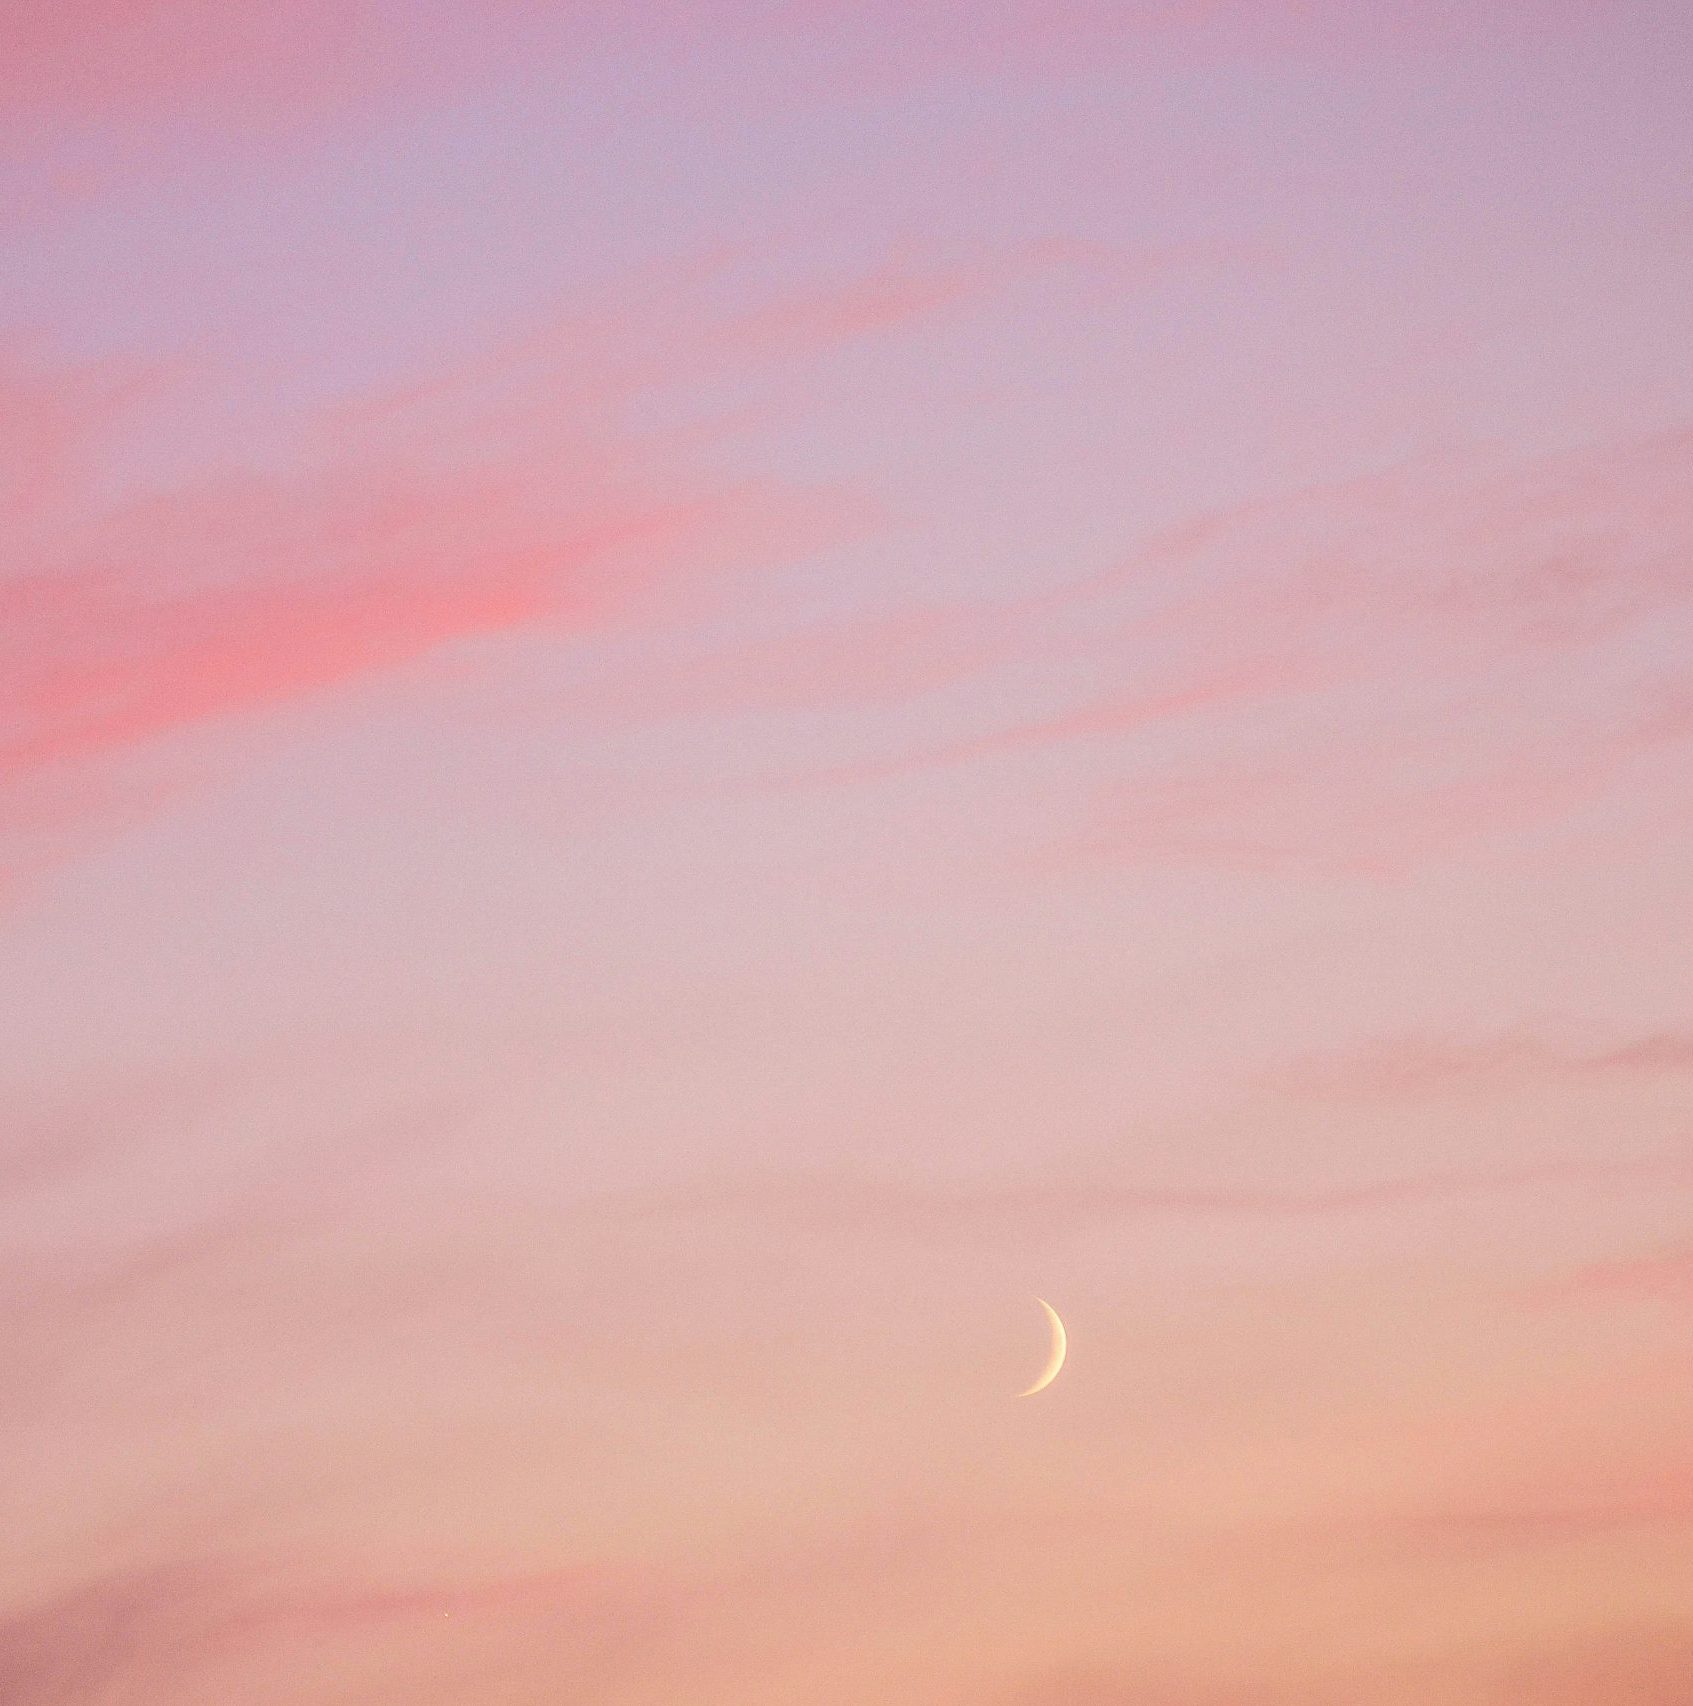 New Moon in Pink Colored Sky